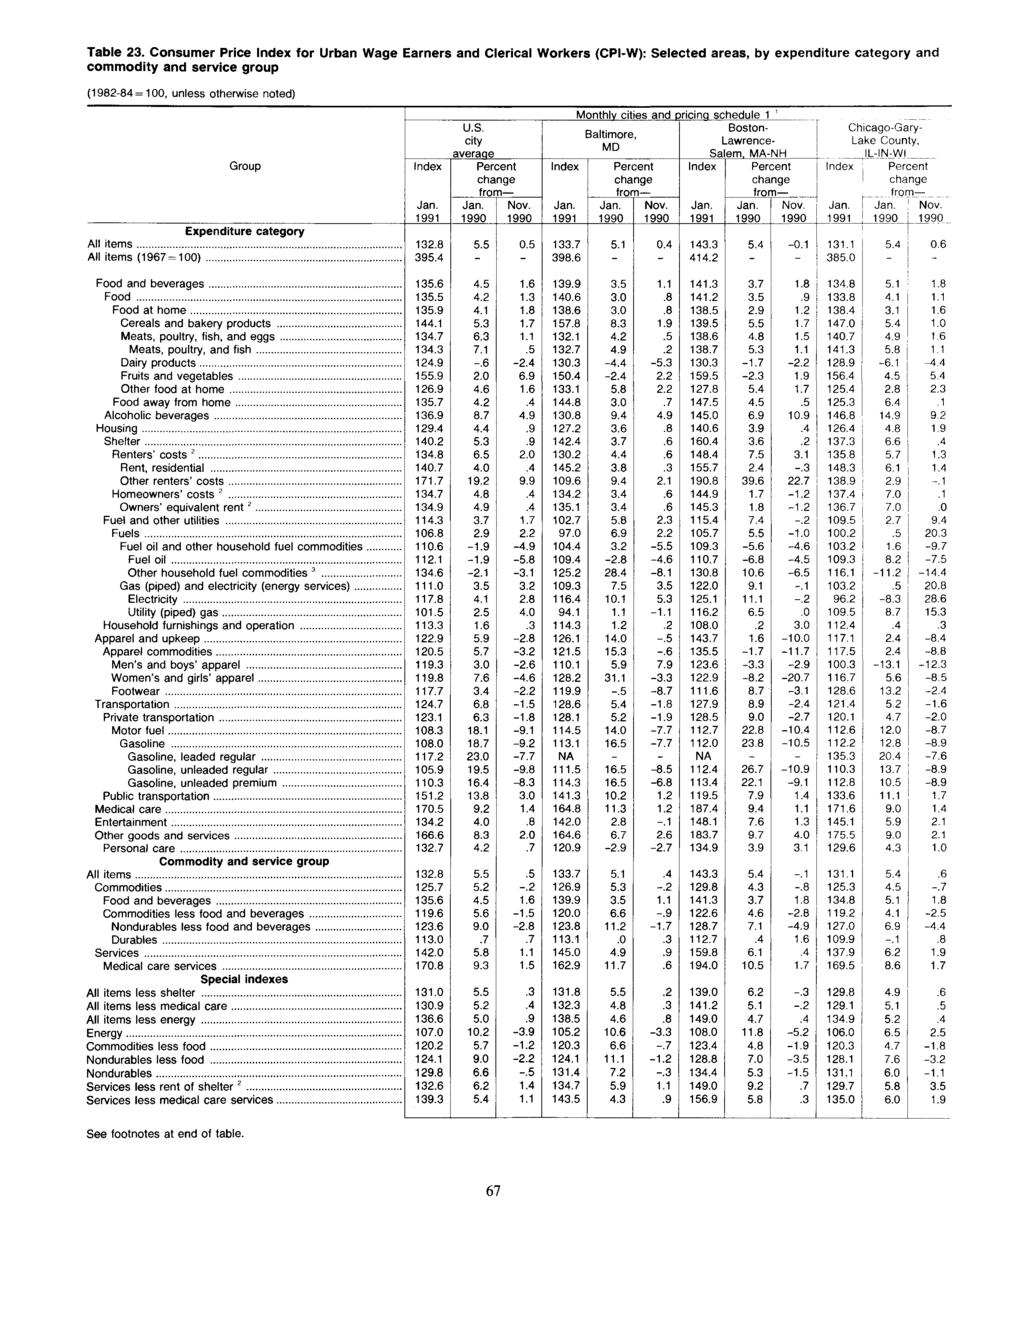 Table 23. Consumer Price for Urban Wage Earners and Clerical Workers (CPI-W): Selected areas, by expenditure category and commodity and service group (1982-84 100, unless otherwise noted) U.S. city Nov.